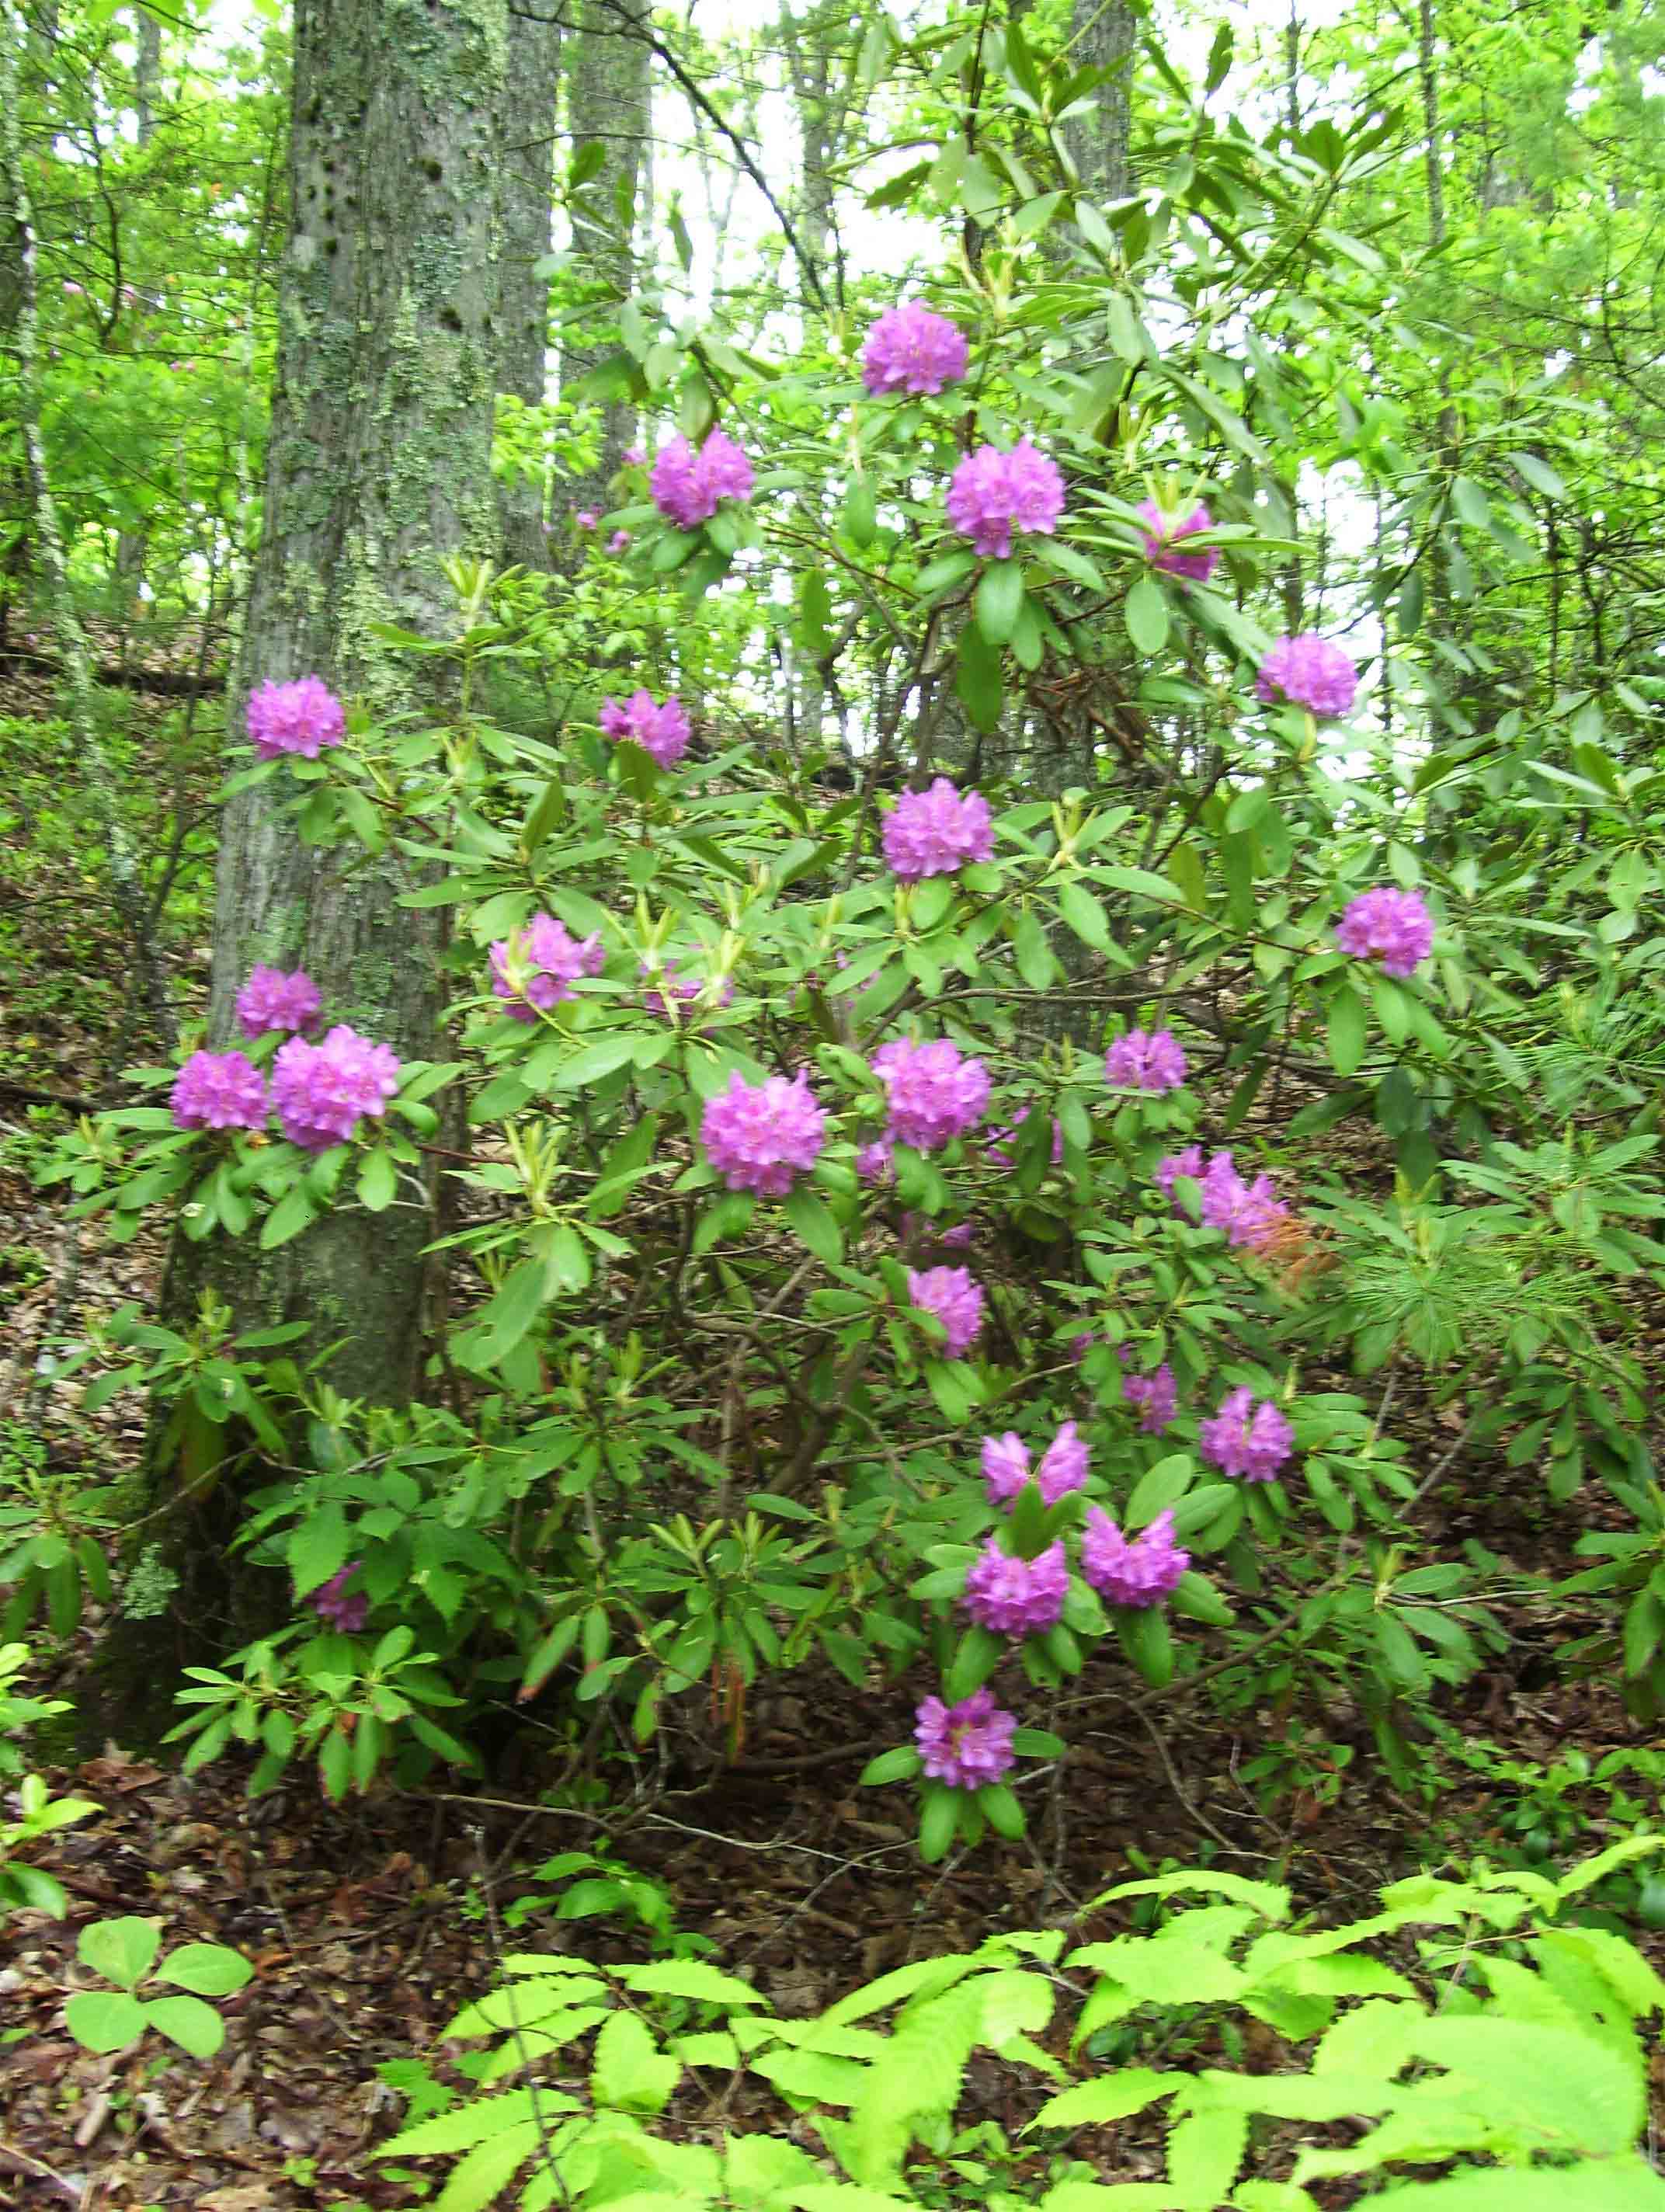 Rhododendron along trail.  Taken at approx. mm 7.7.  Courtesy dlcul@conncoll.edu